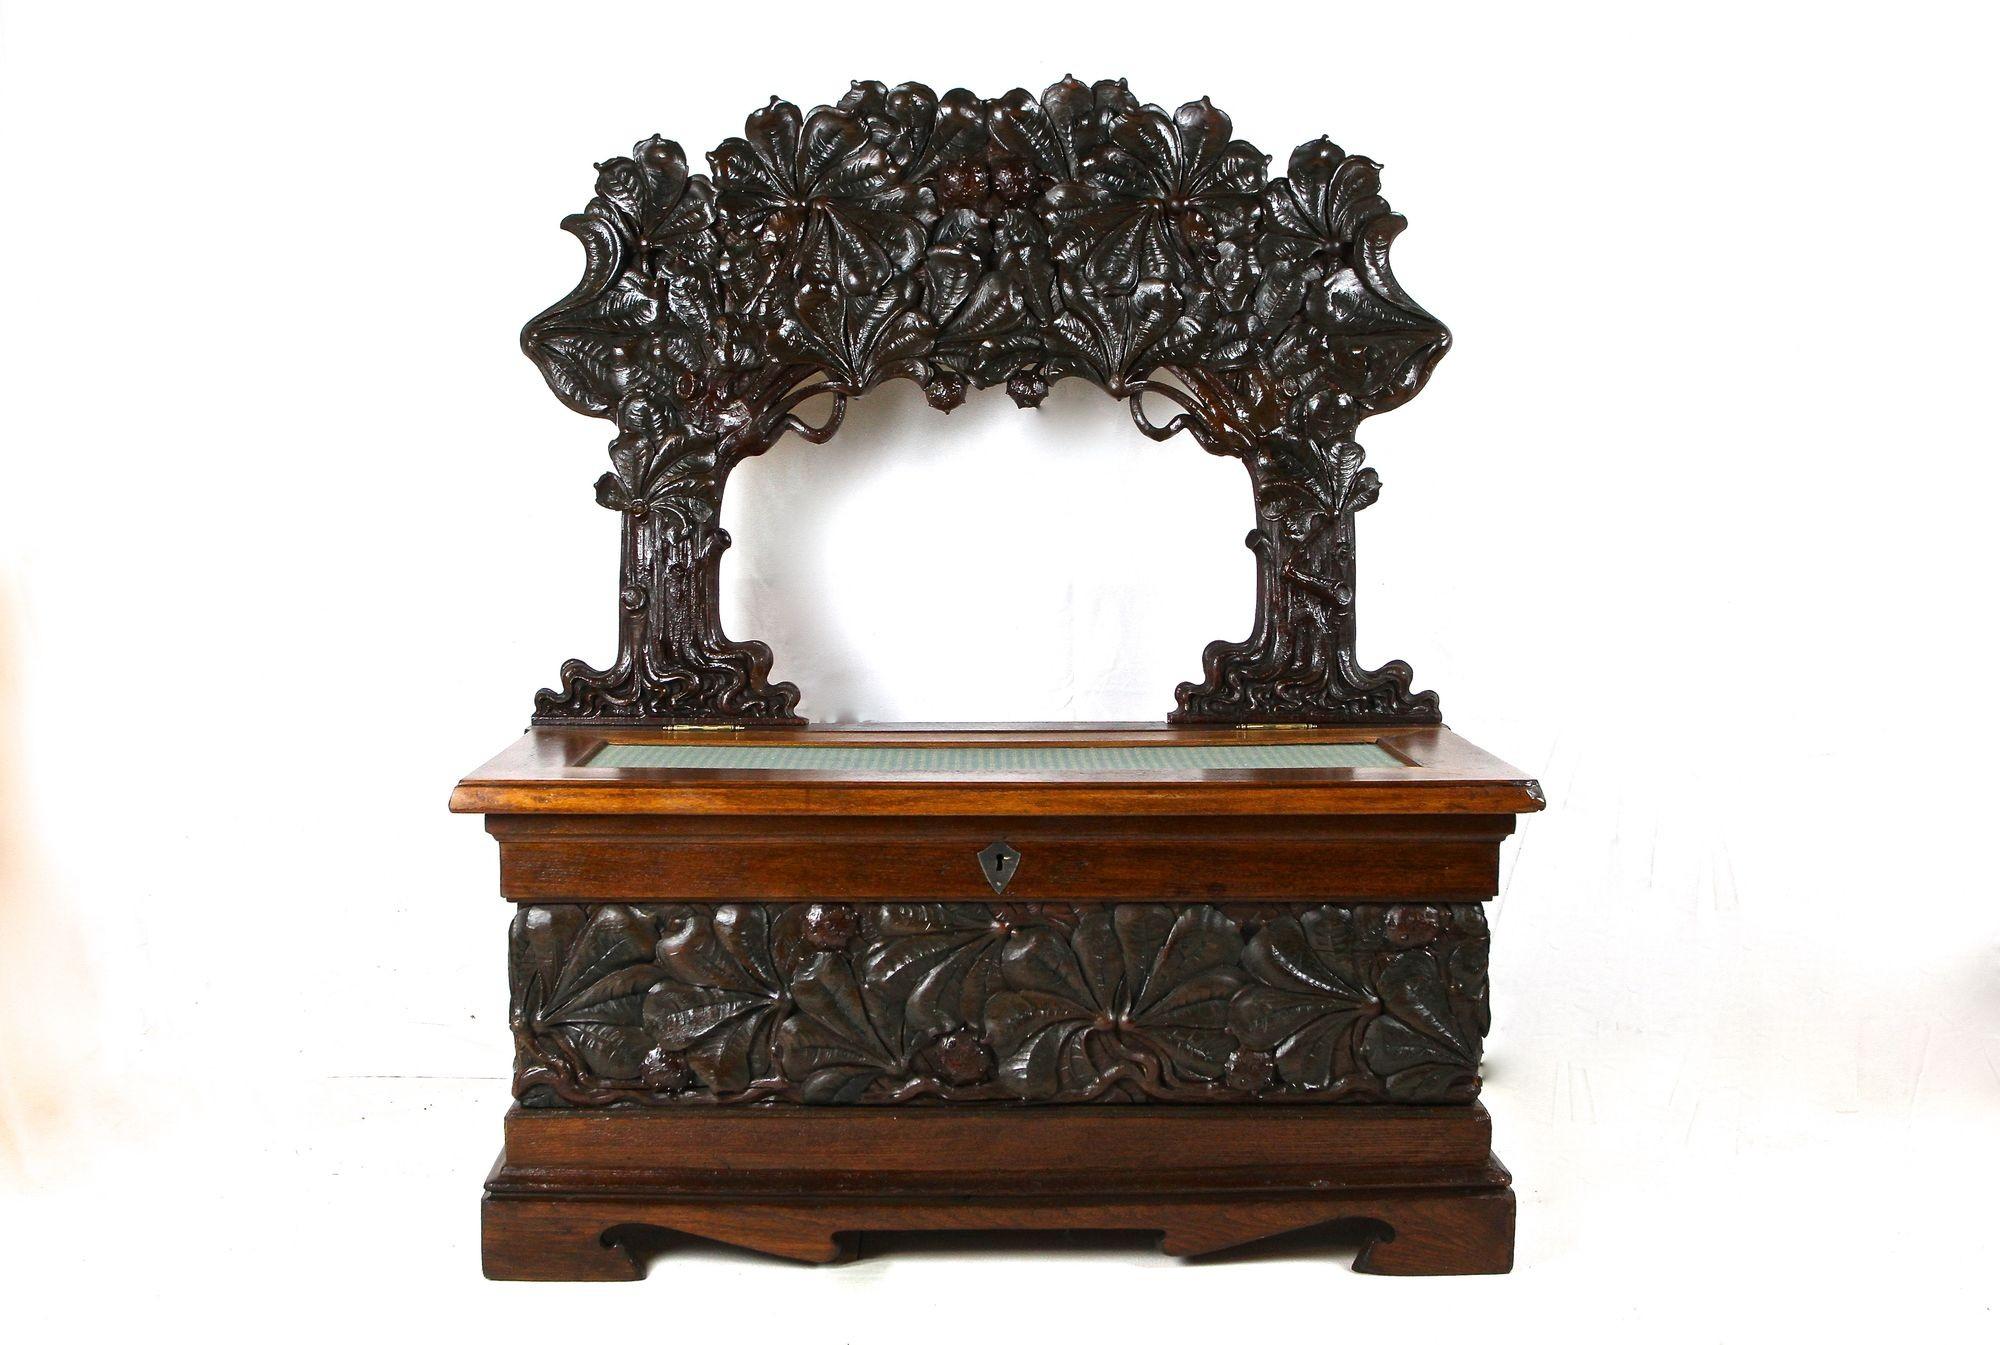 One of a kind late 19th/ early 20th century chest bench from the early Art Nouveau period around 1890/ 1900 in France. This artfully crafted, exceptional looking Art Nouveau chest bench impresses with its elaborate handcarved backrest which shows an